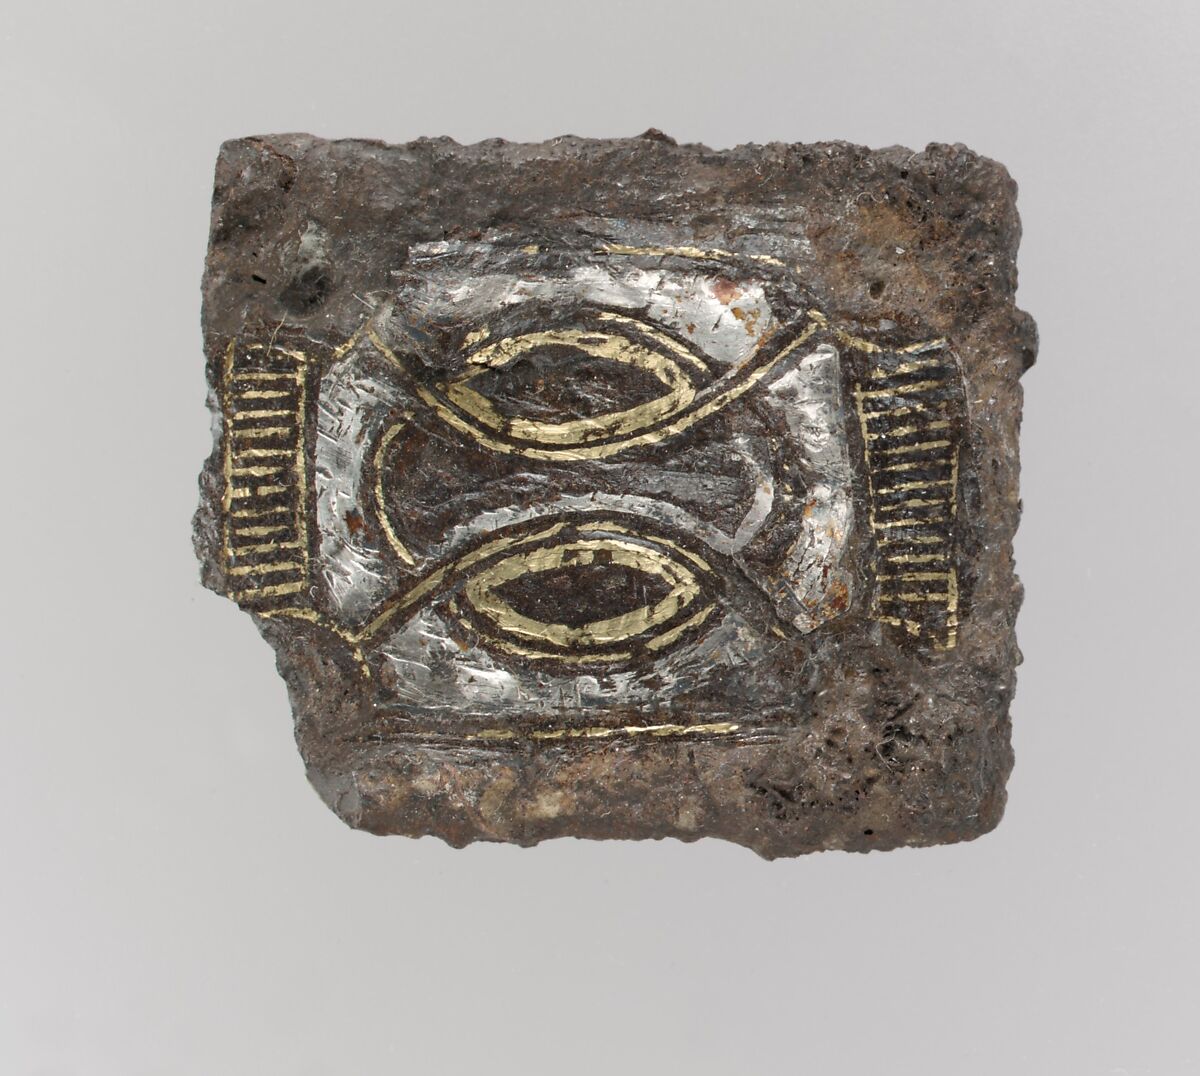 Backplate of a Belt Buckle, Iron with silver and copper alloy inlays, Frankish 